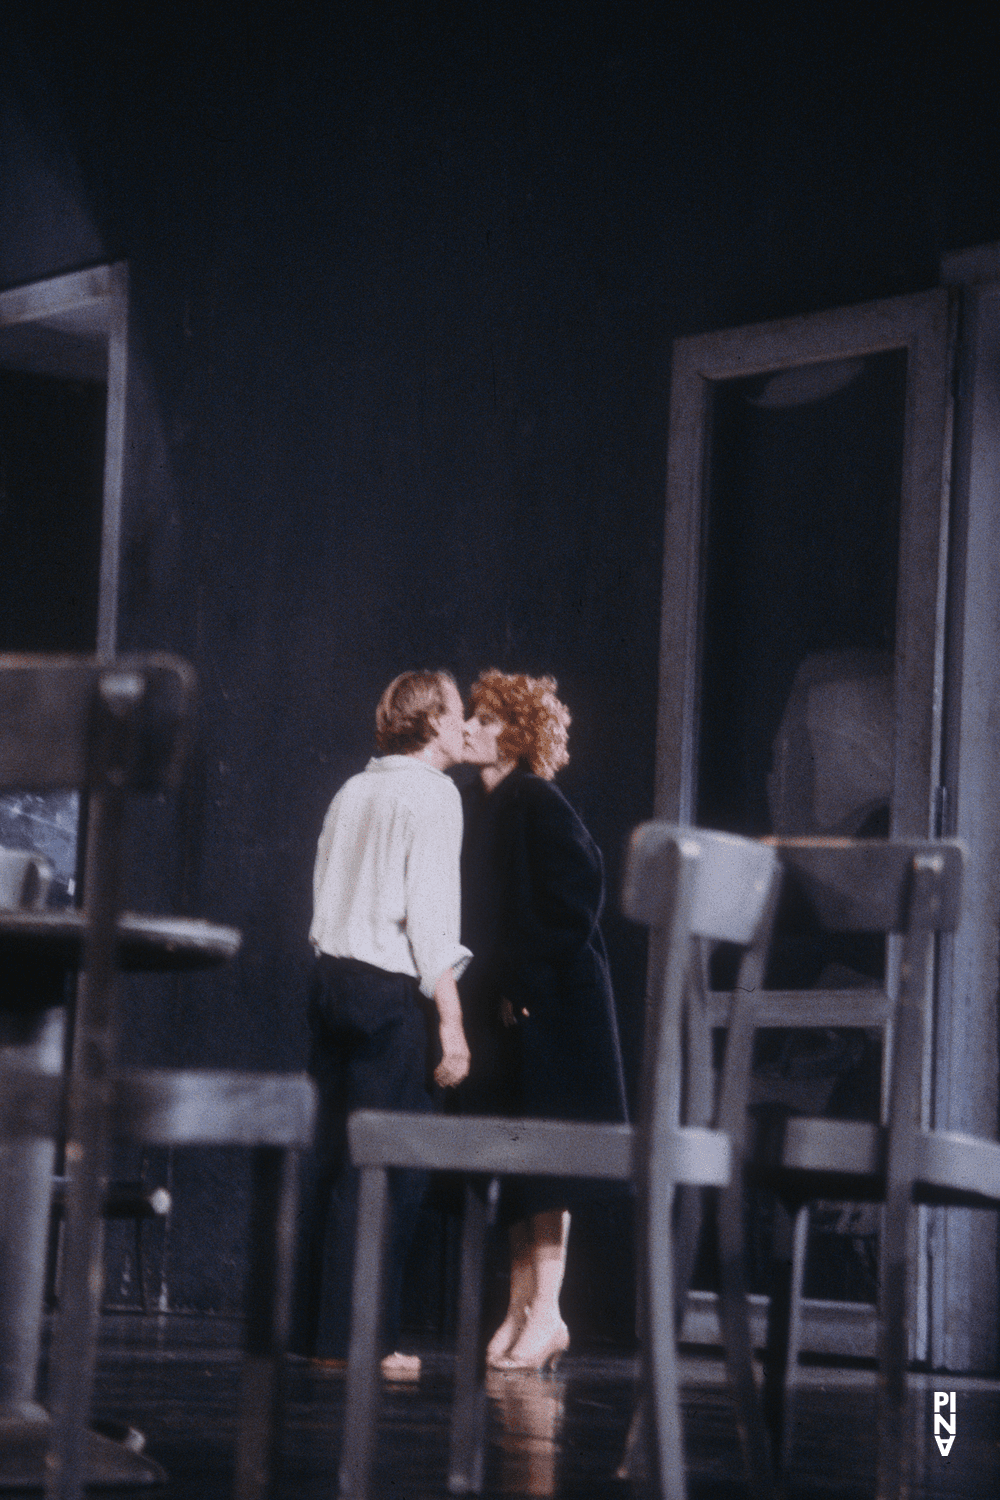 Dominique Mercy and Nazareth Panadero in “Café Müller” by Pina Bausch